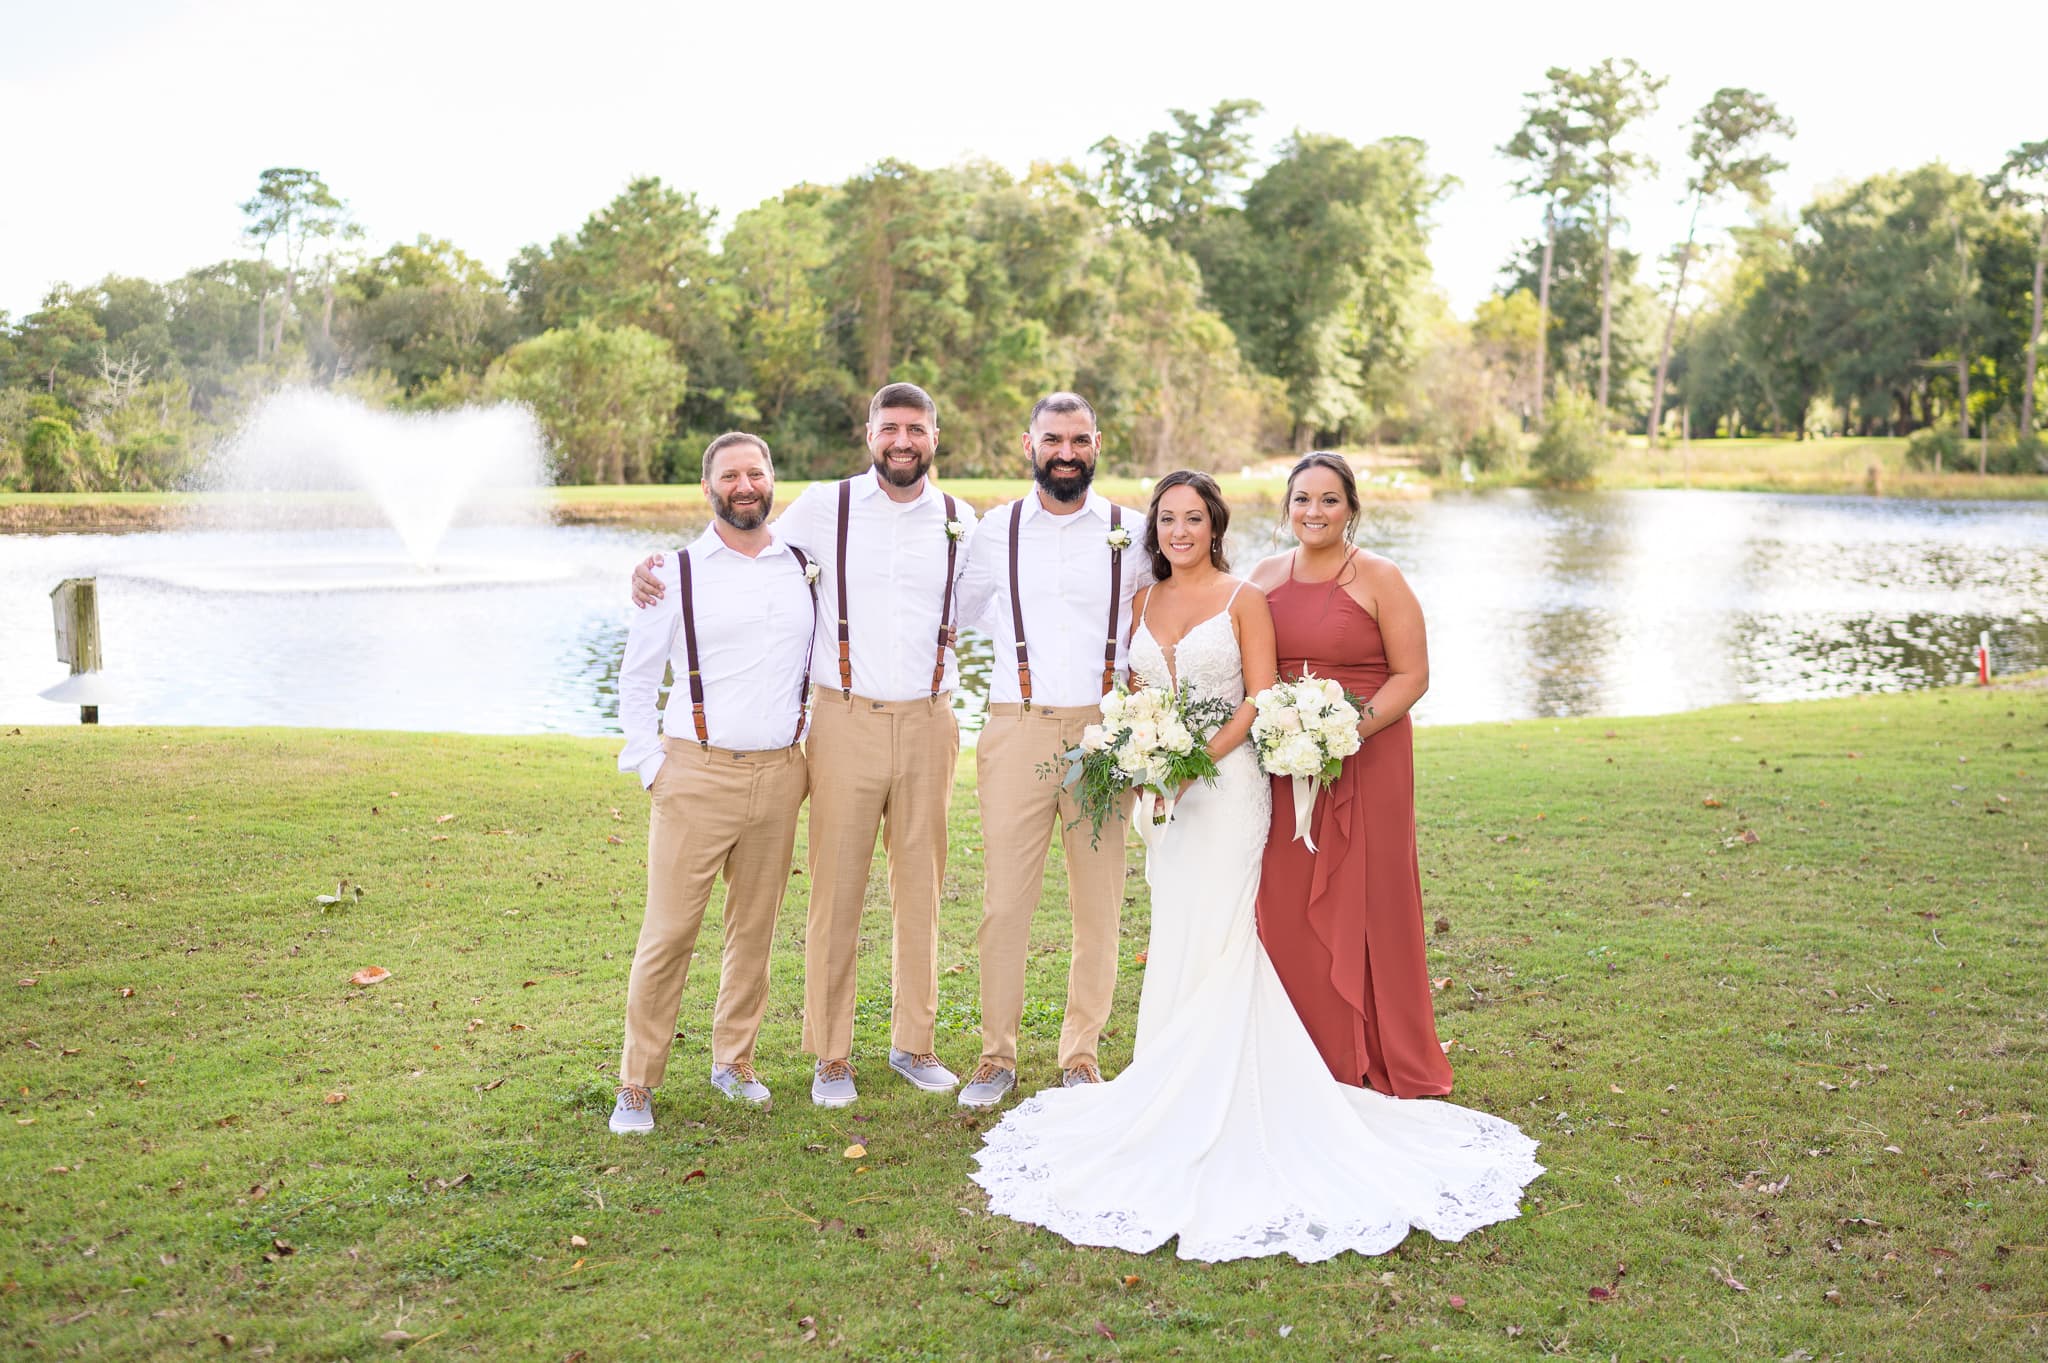 Bridal party with bride's sister and groom's brothers - Pawleys Plantation